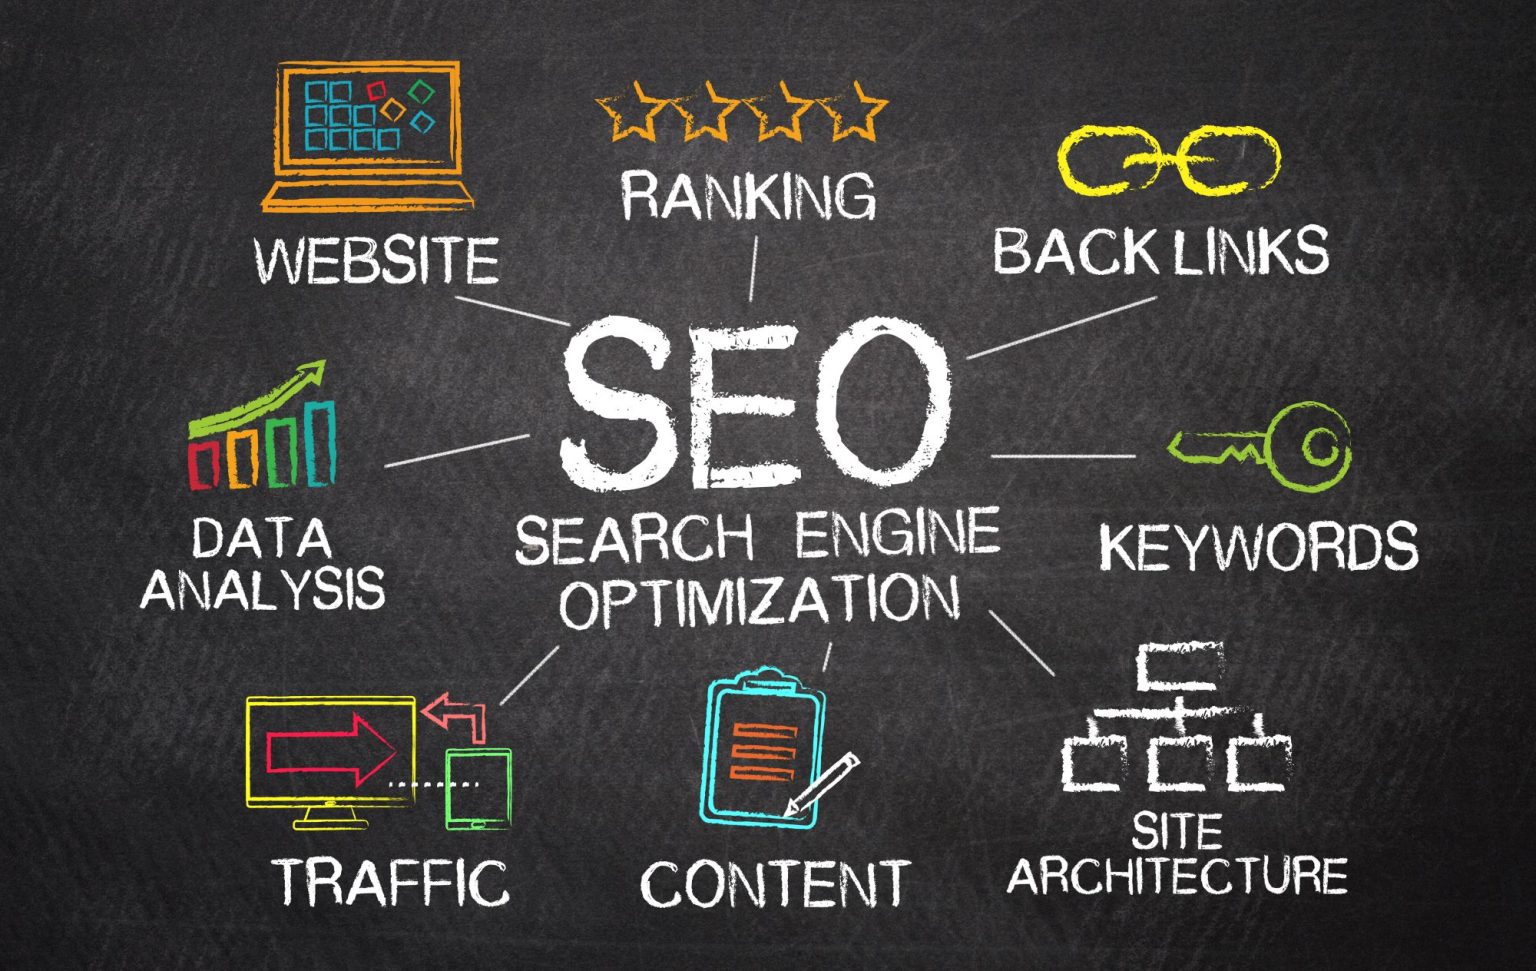 What is an seo backlink?